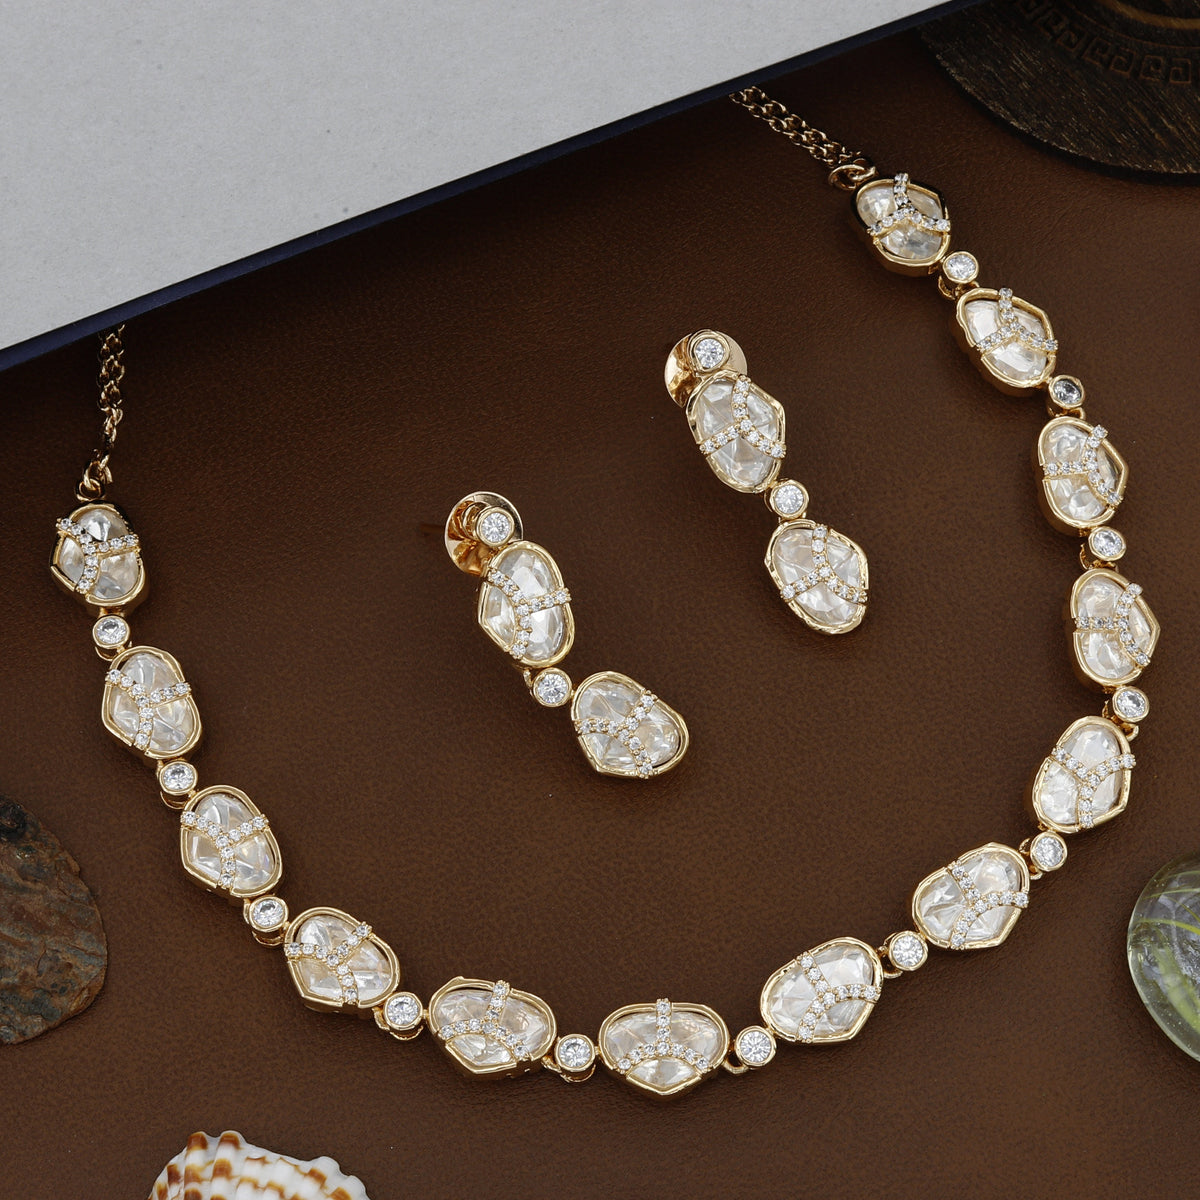 Antique Polki Necklace Set With Earrings